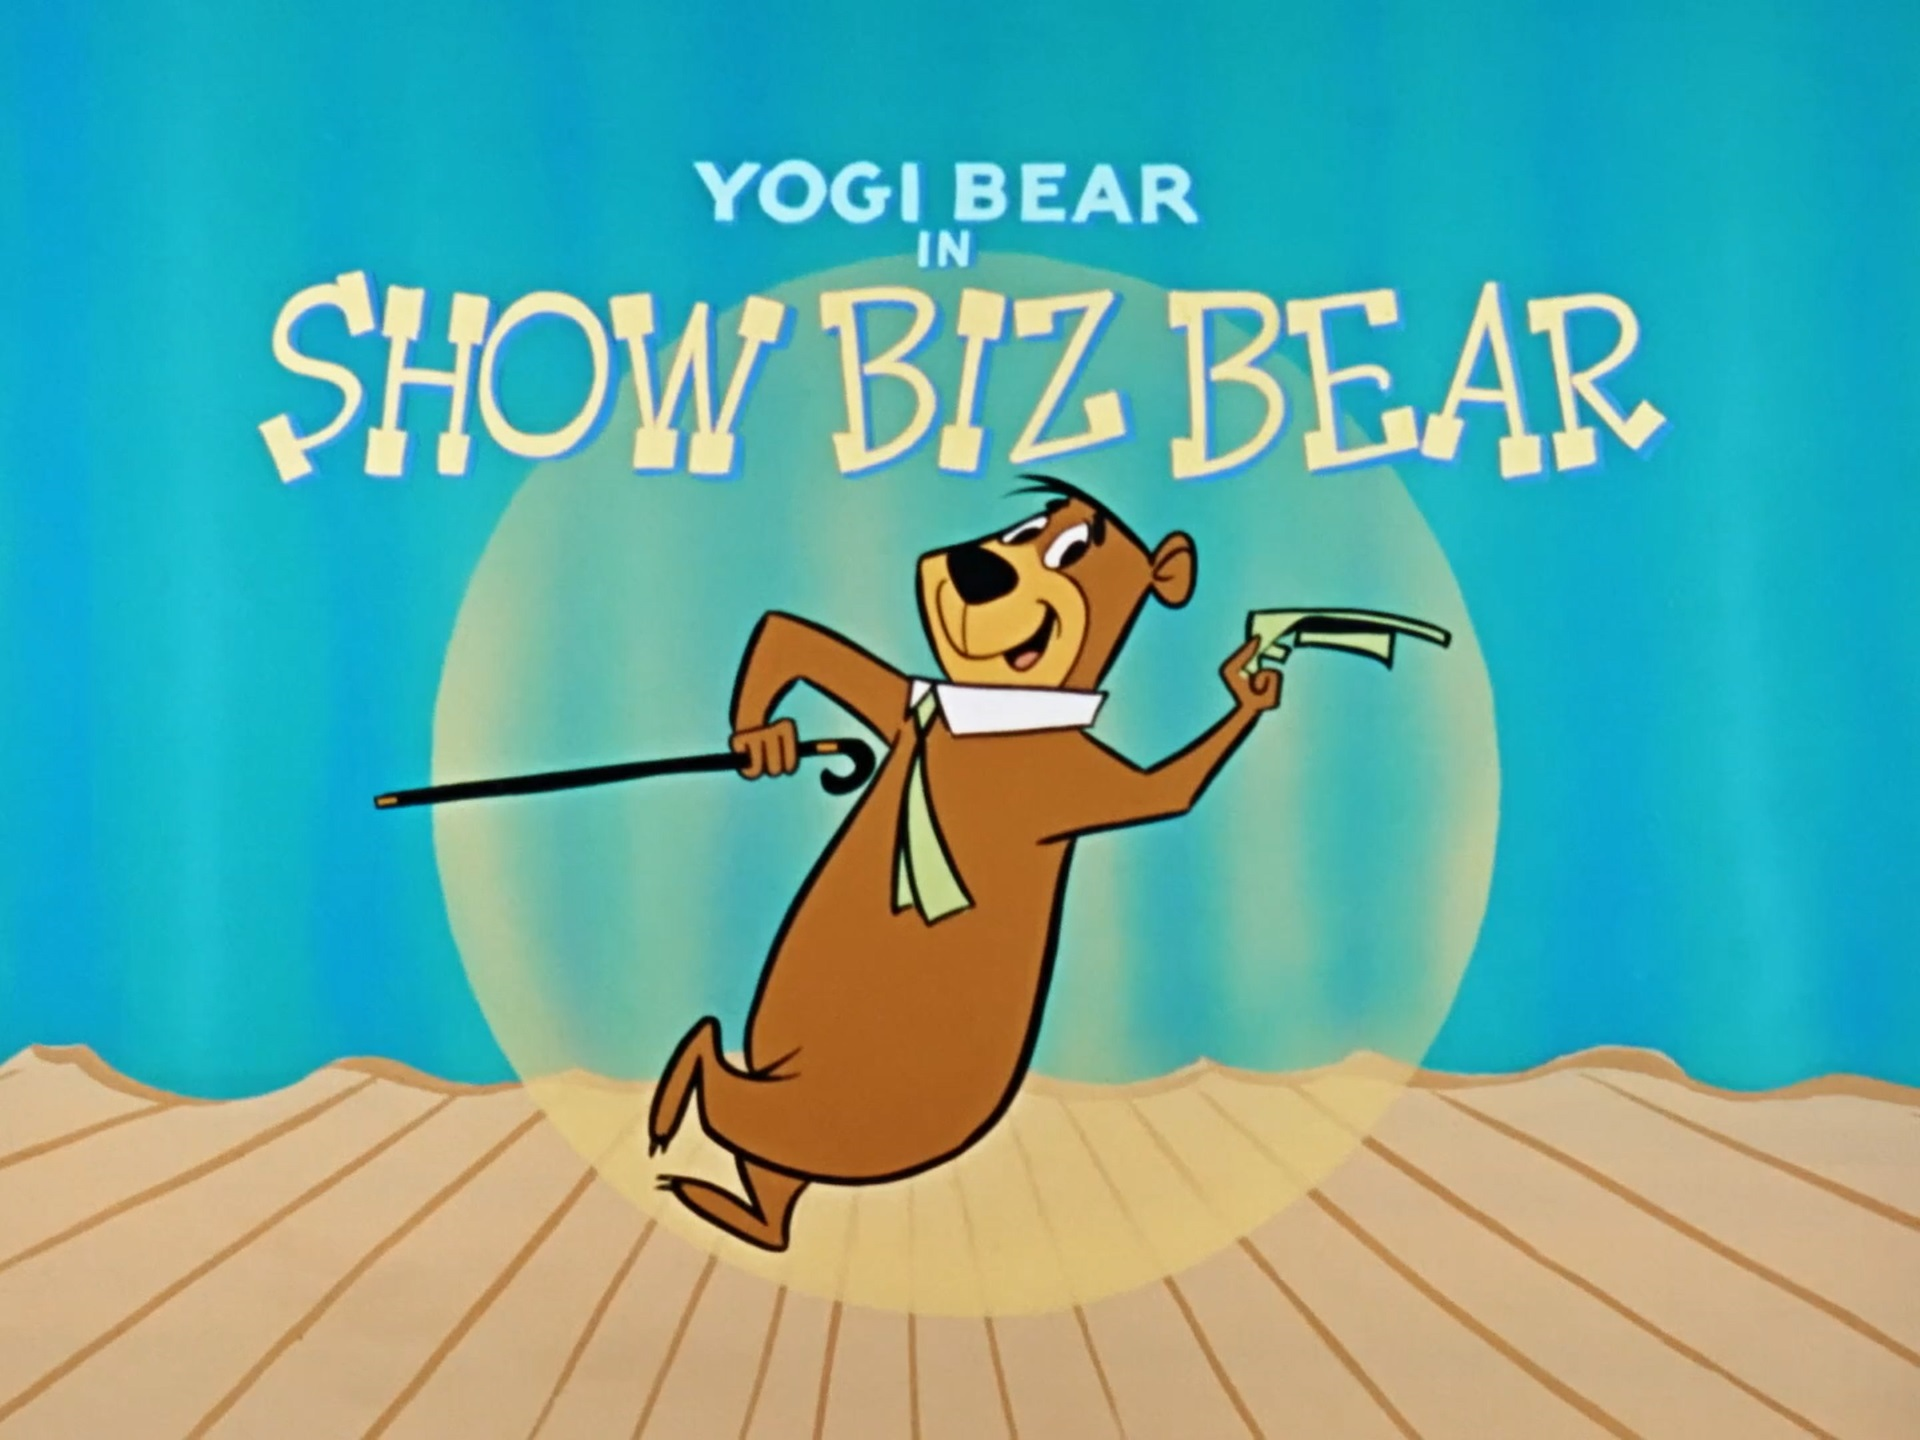 YOGI BARE Events and Tickets